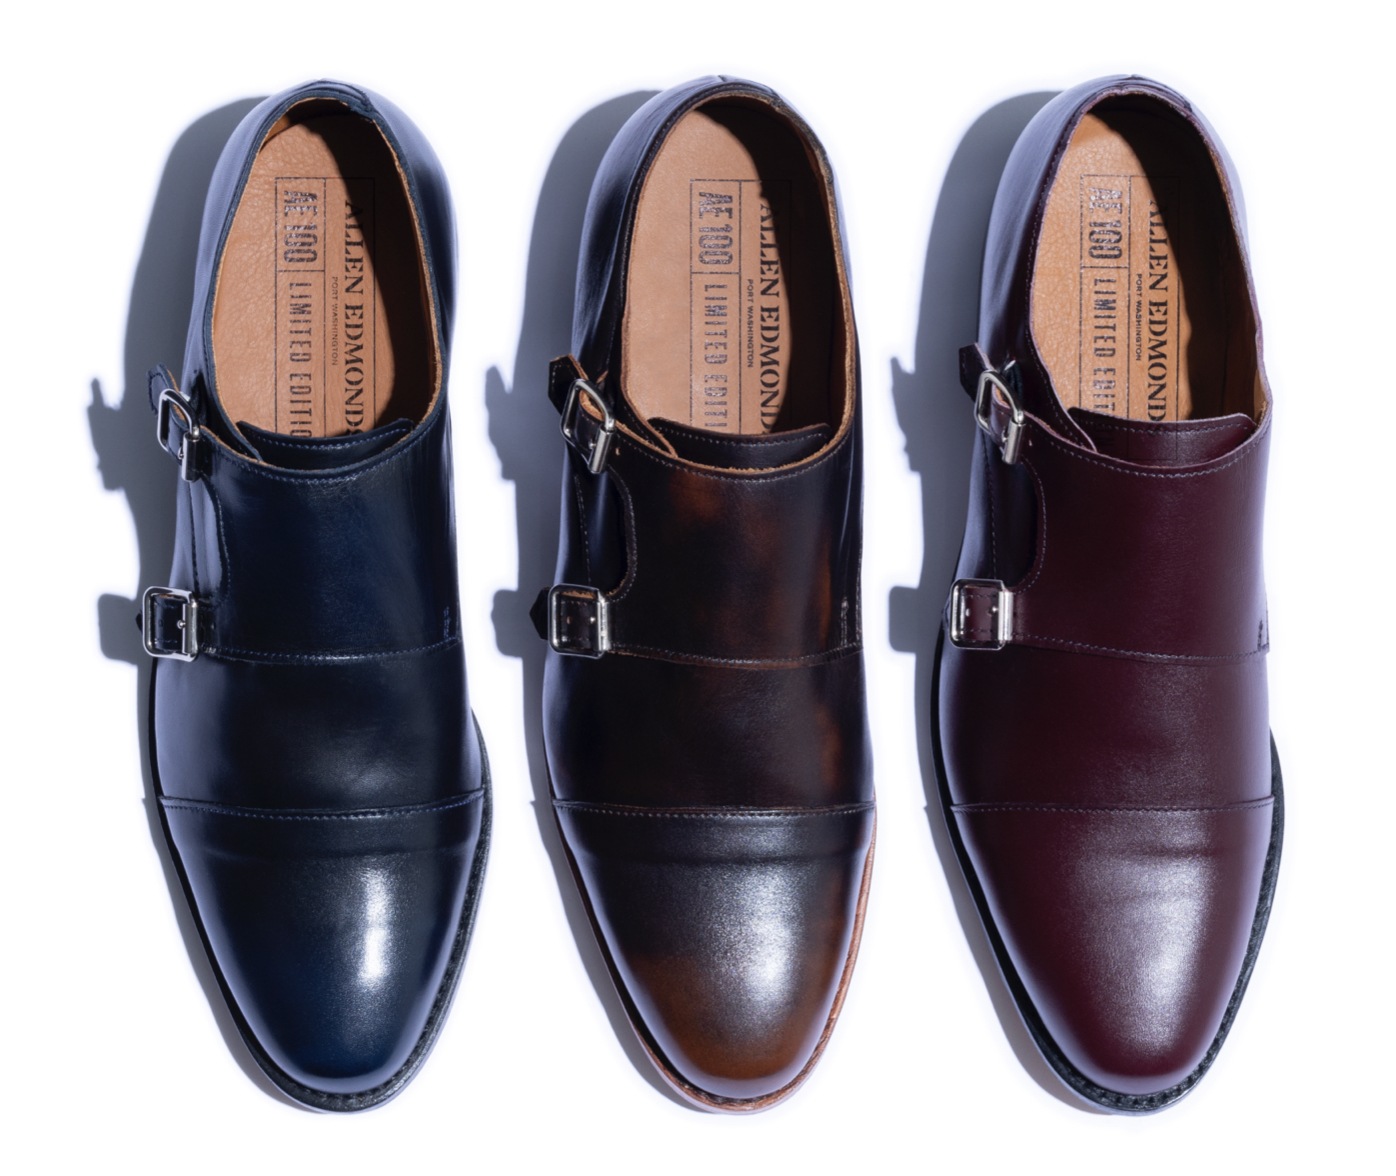 Three Mora Double Monk Strap Shoes - Limited Drop